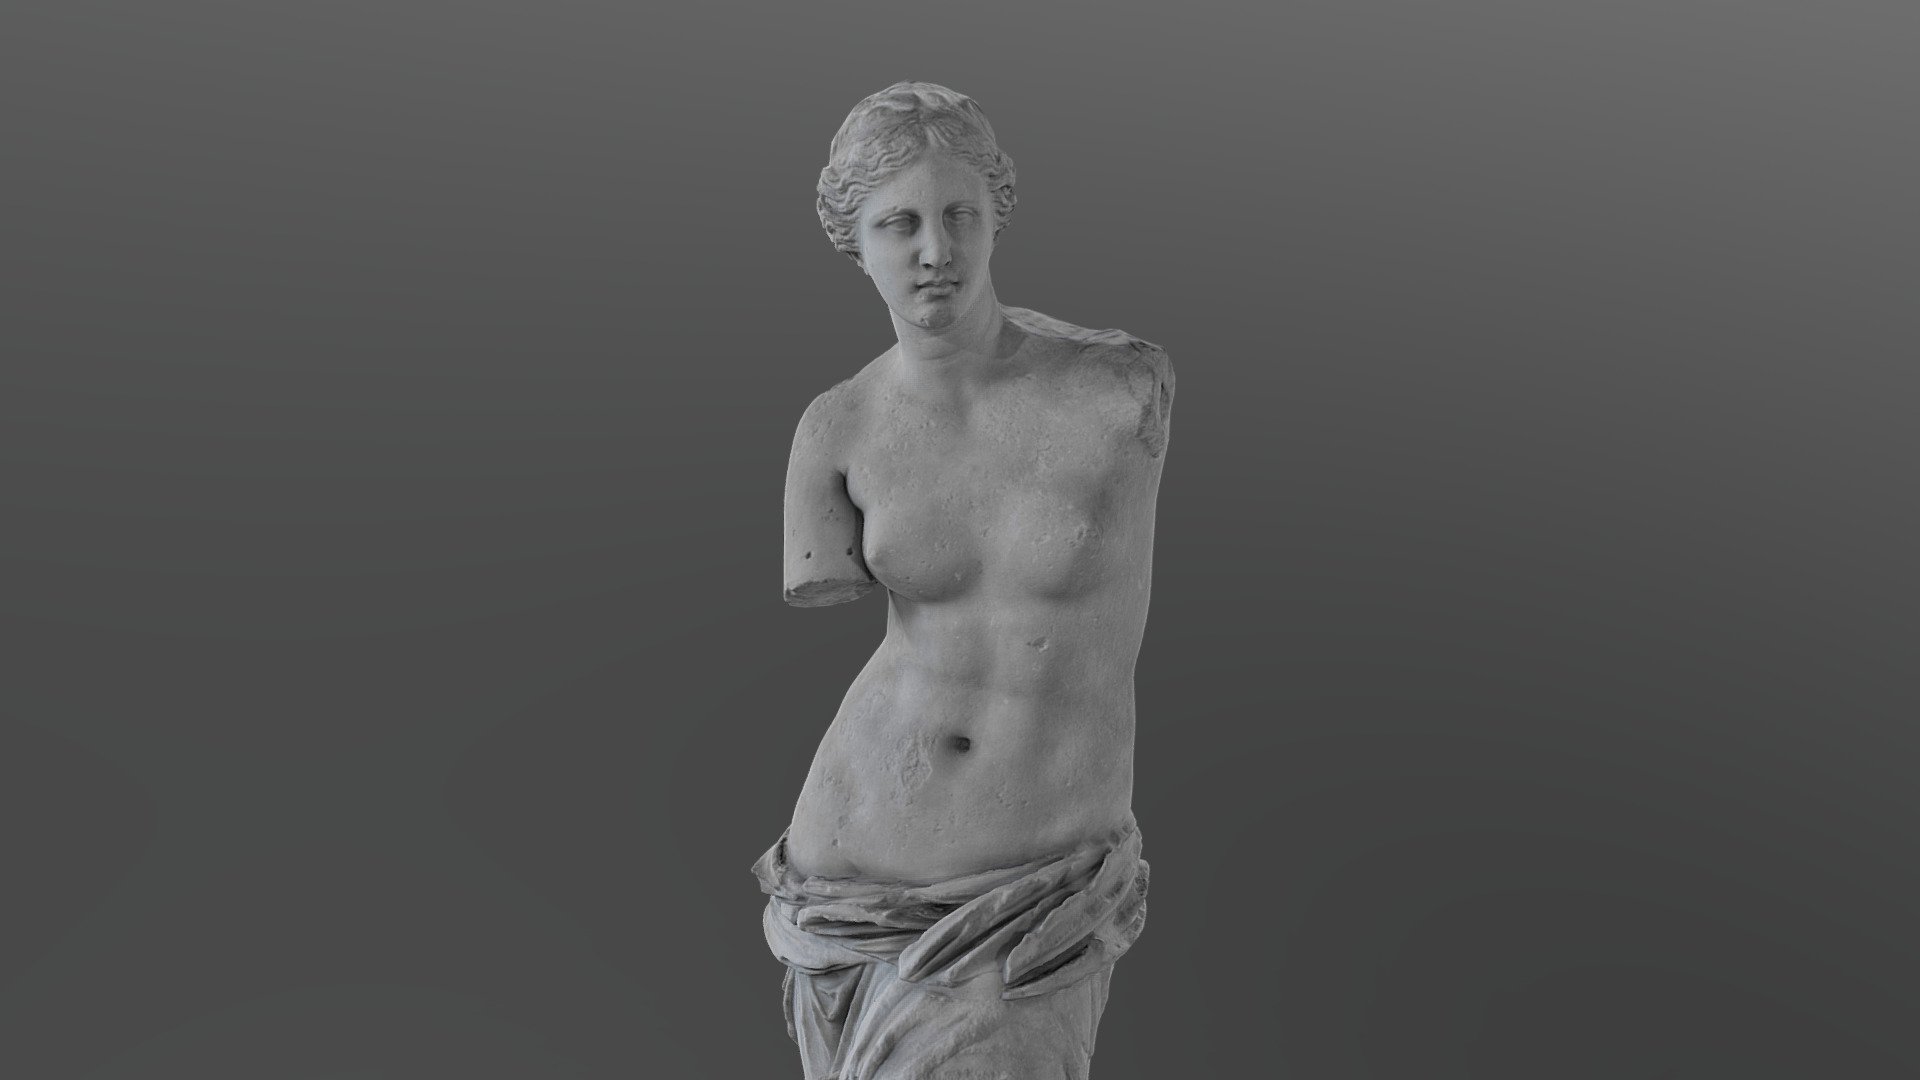 Venus de Milo is one of the most famous sculpture of all time. Displayed at the Louvre Museum in France, it is an ancient Greek sculpture (around 150-125 BC) which is believed to depict Aphrodite, the Greek goddess of love and beauty.

Reconstructed and simplified with Reality Capture (375 pictures) 3d model